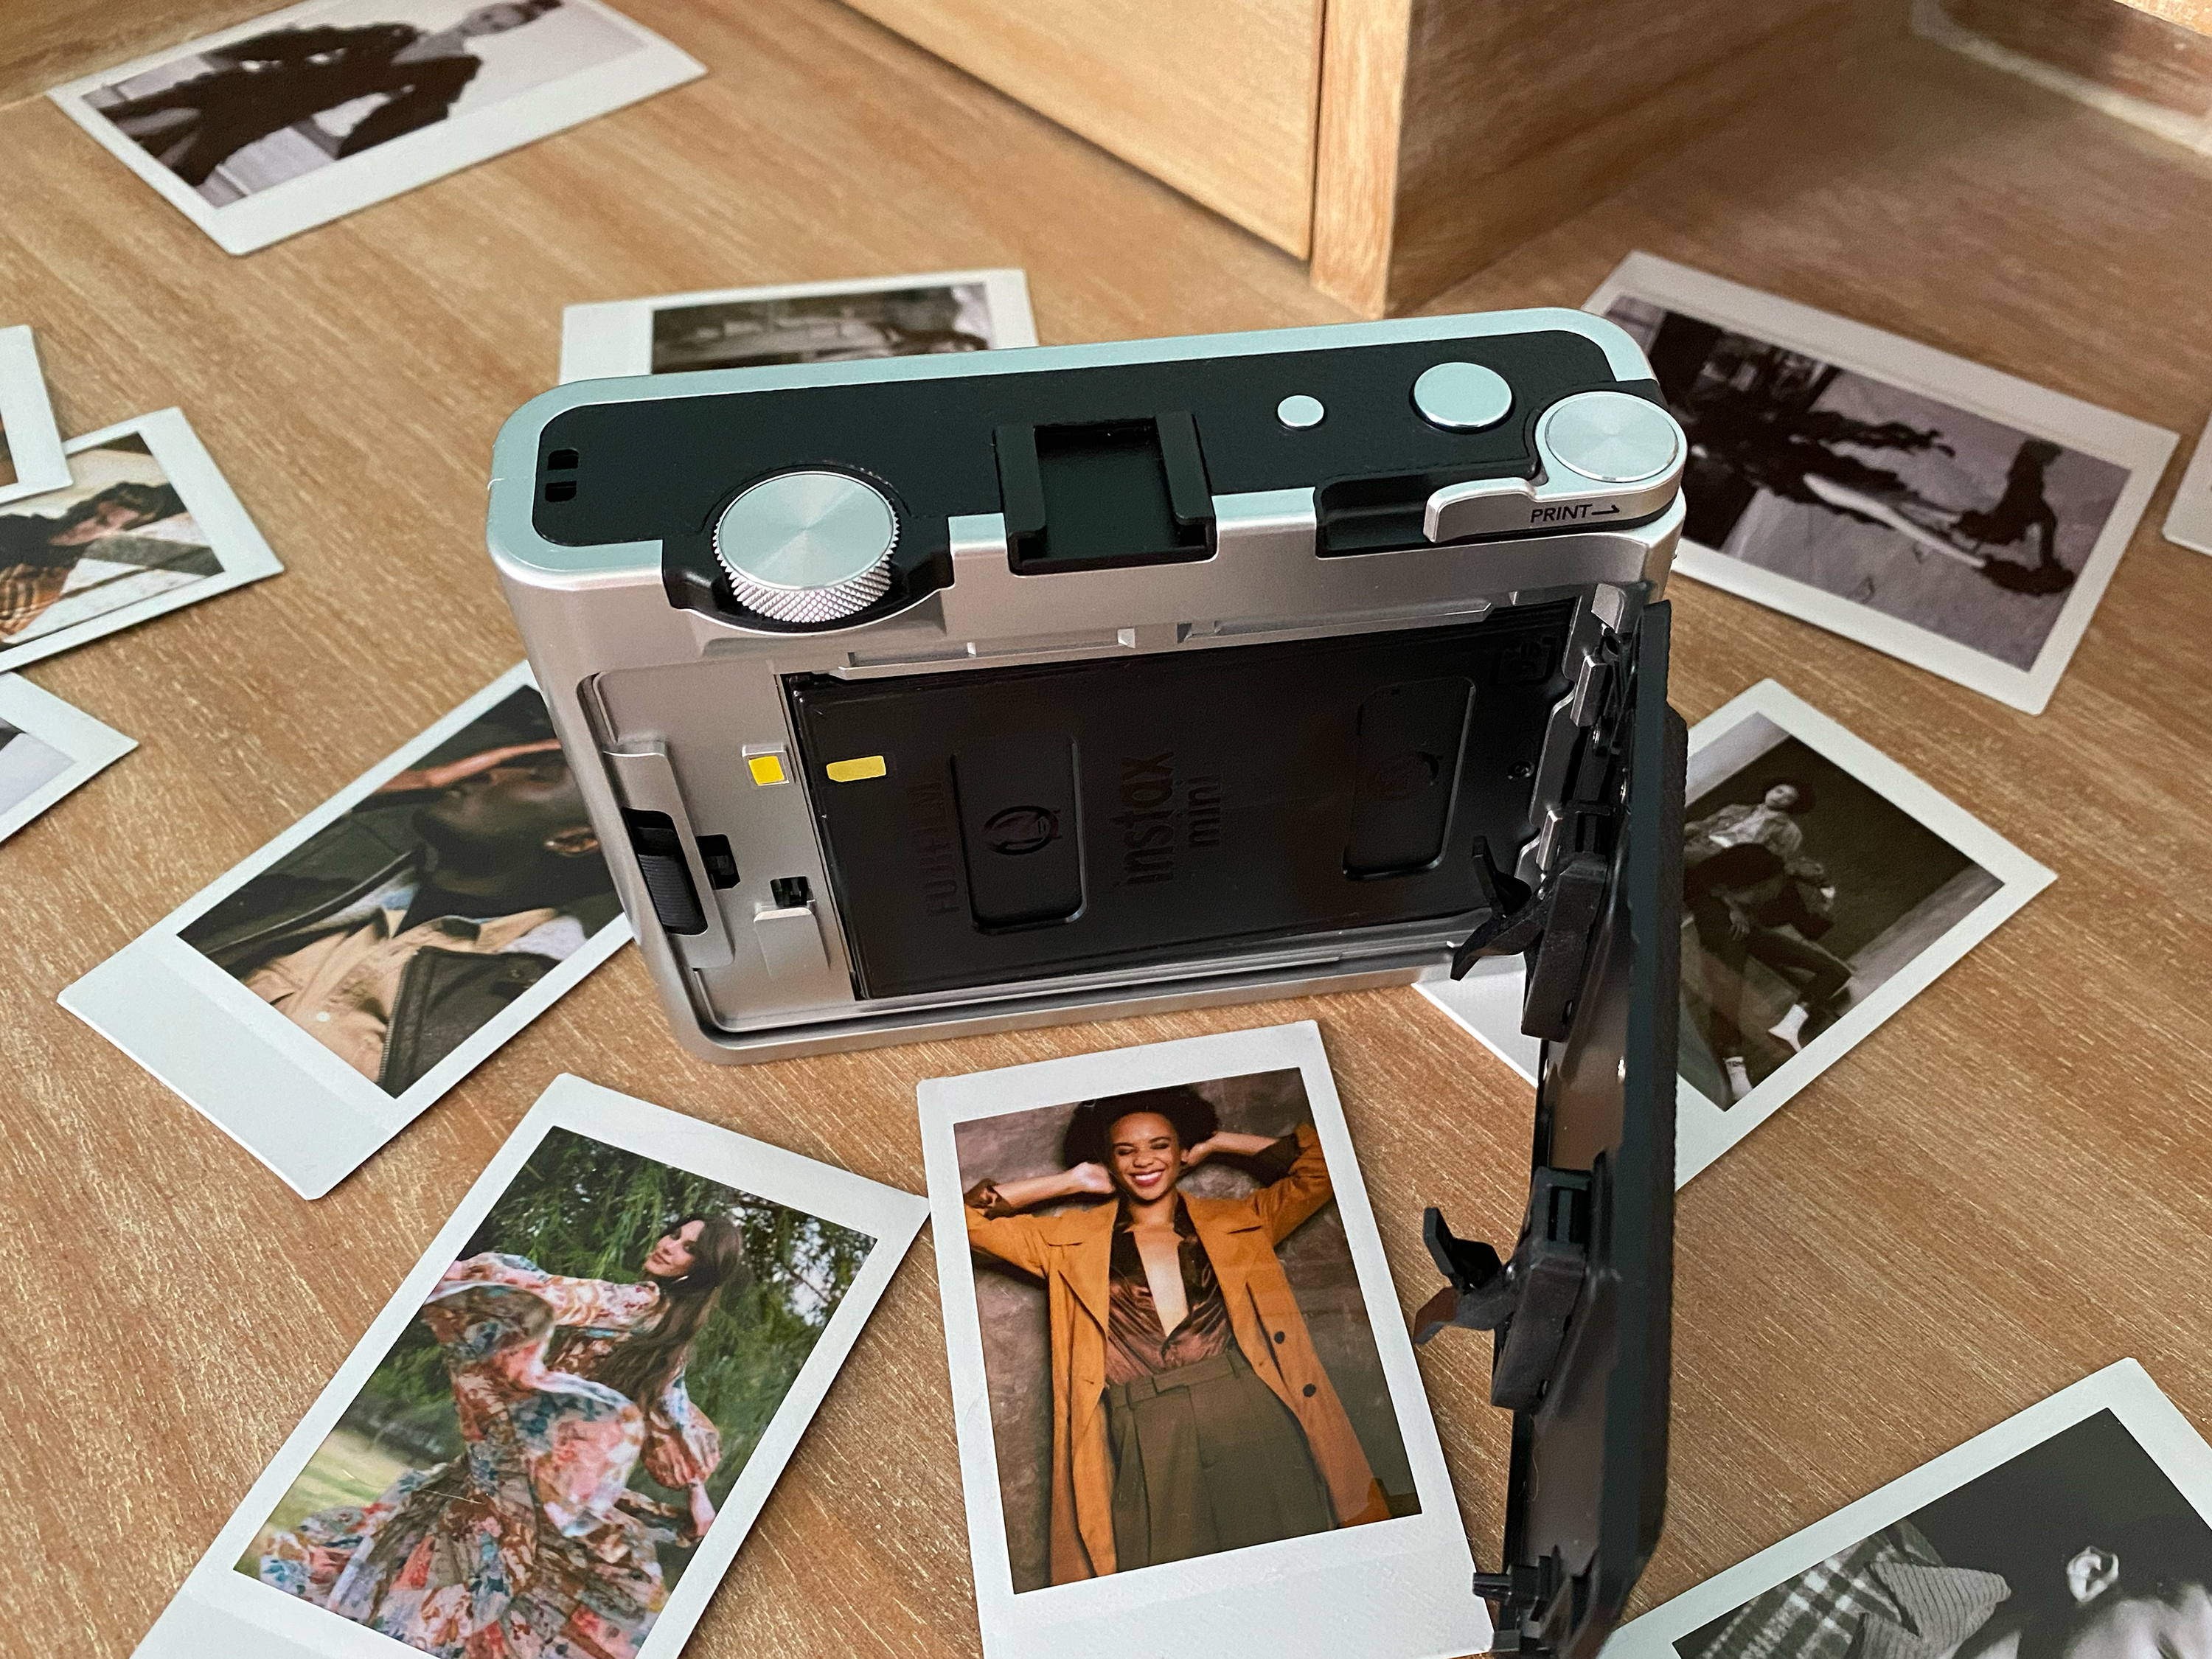 Brittany-Smith-The-Phoblographer-Instax-Mini-Evo-Product-Image-4723